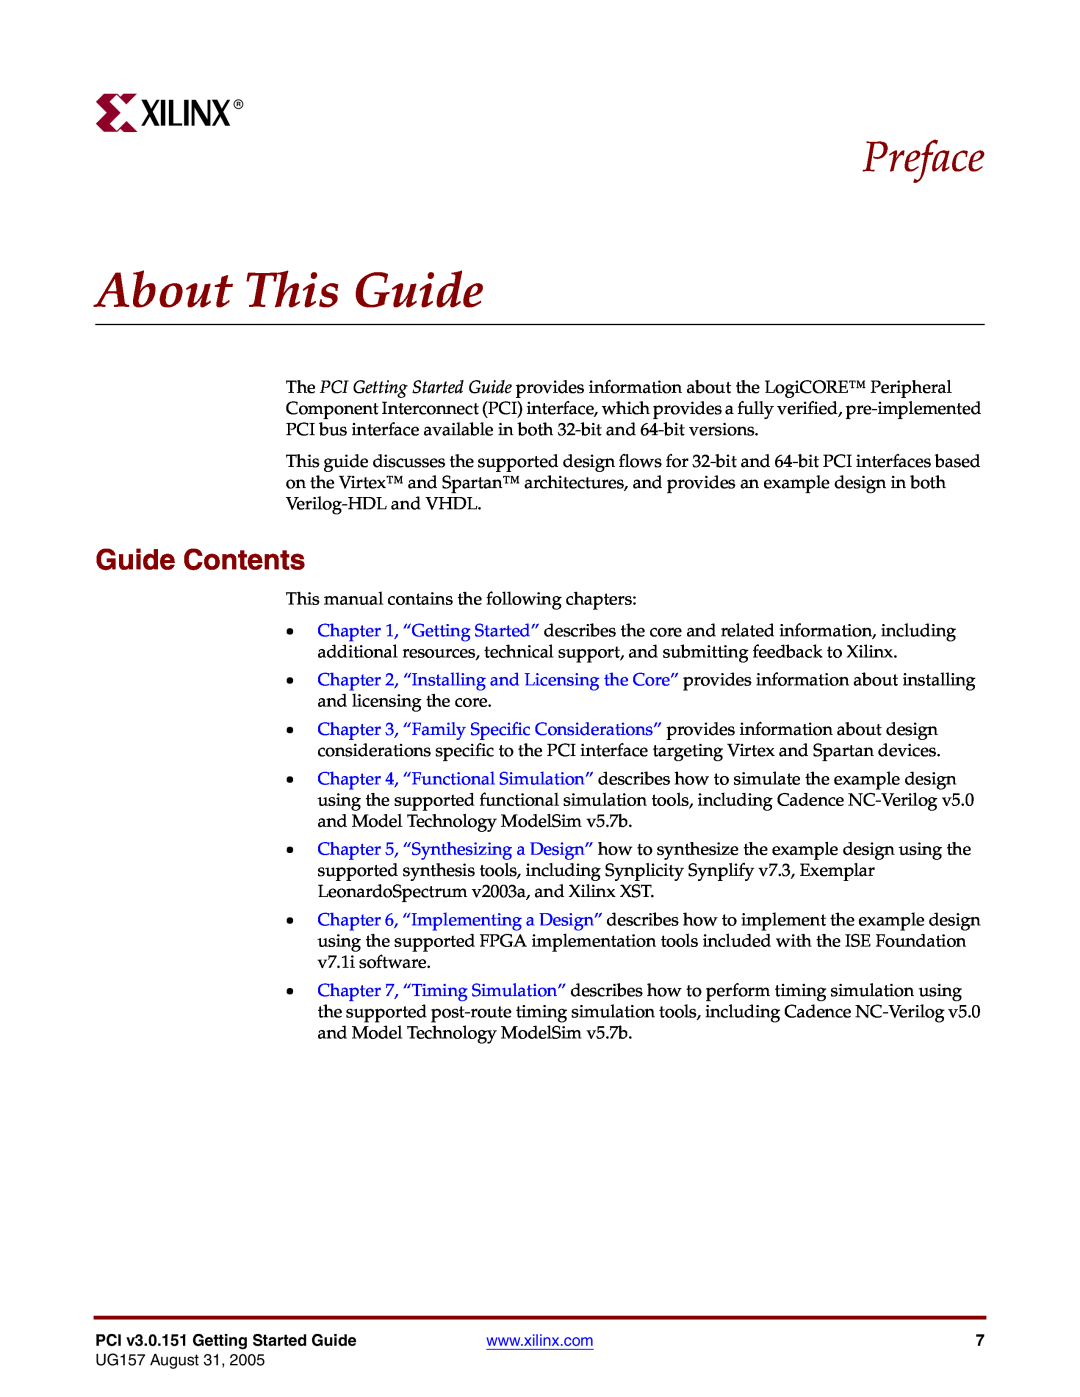 Xilinx PCI v3.0 manual About This Guide, Preface, Guide Contents 